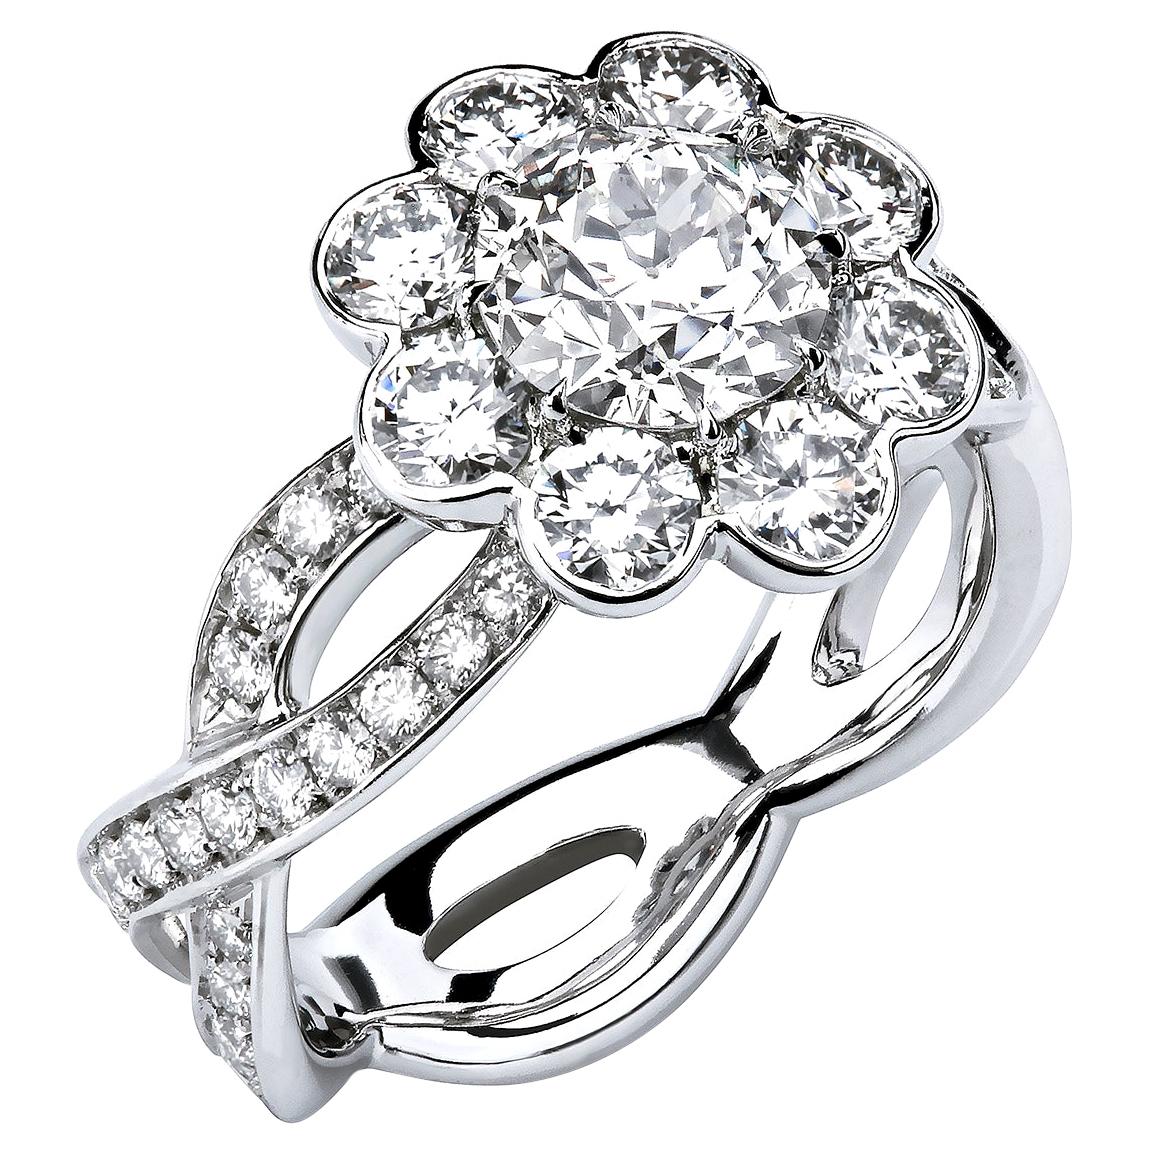 Leon Mege Scalloped Halo Ring with Old European Cut Diamond in Platinum For Sale